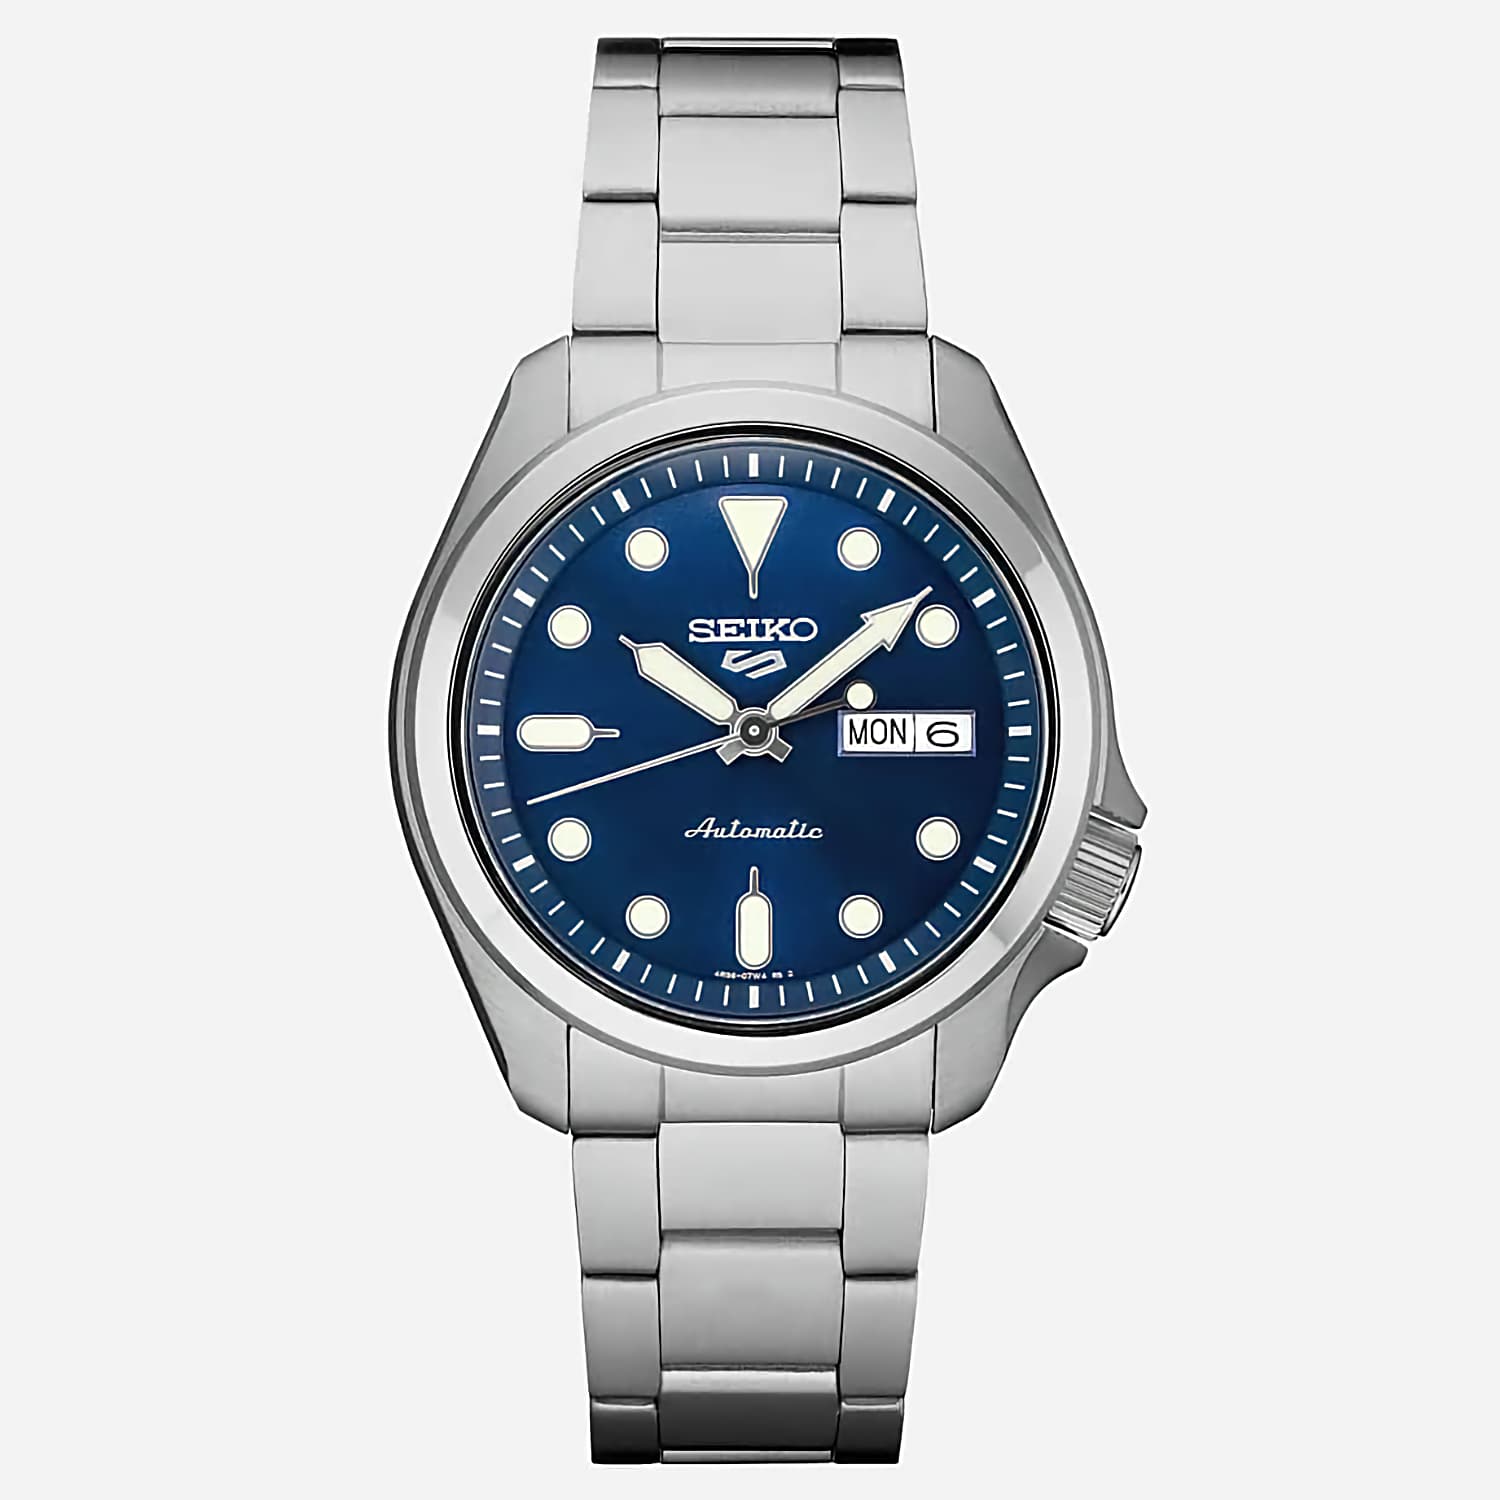 SRPE53K1 SEIKO 5 Automatic Sports Watch. New watches in the Seiko 5 Sports Collection Oxipay is simply the easier way to pay - use Oxipay and well spread your payment up to a maximum of $1500 over either 4 or 8 easy instalments. No interest. Ever! 3 Month